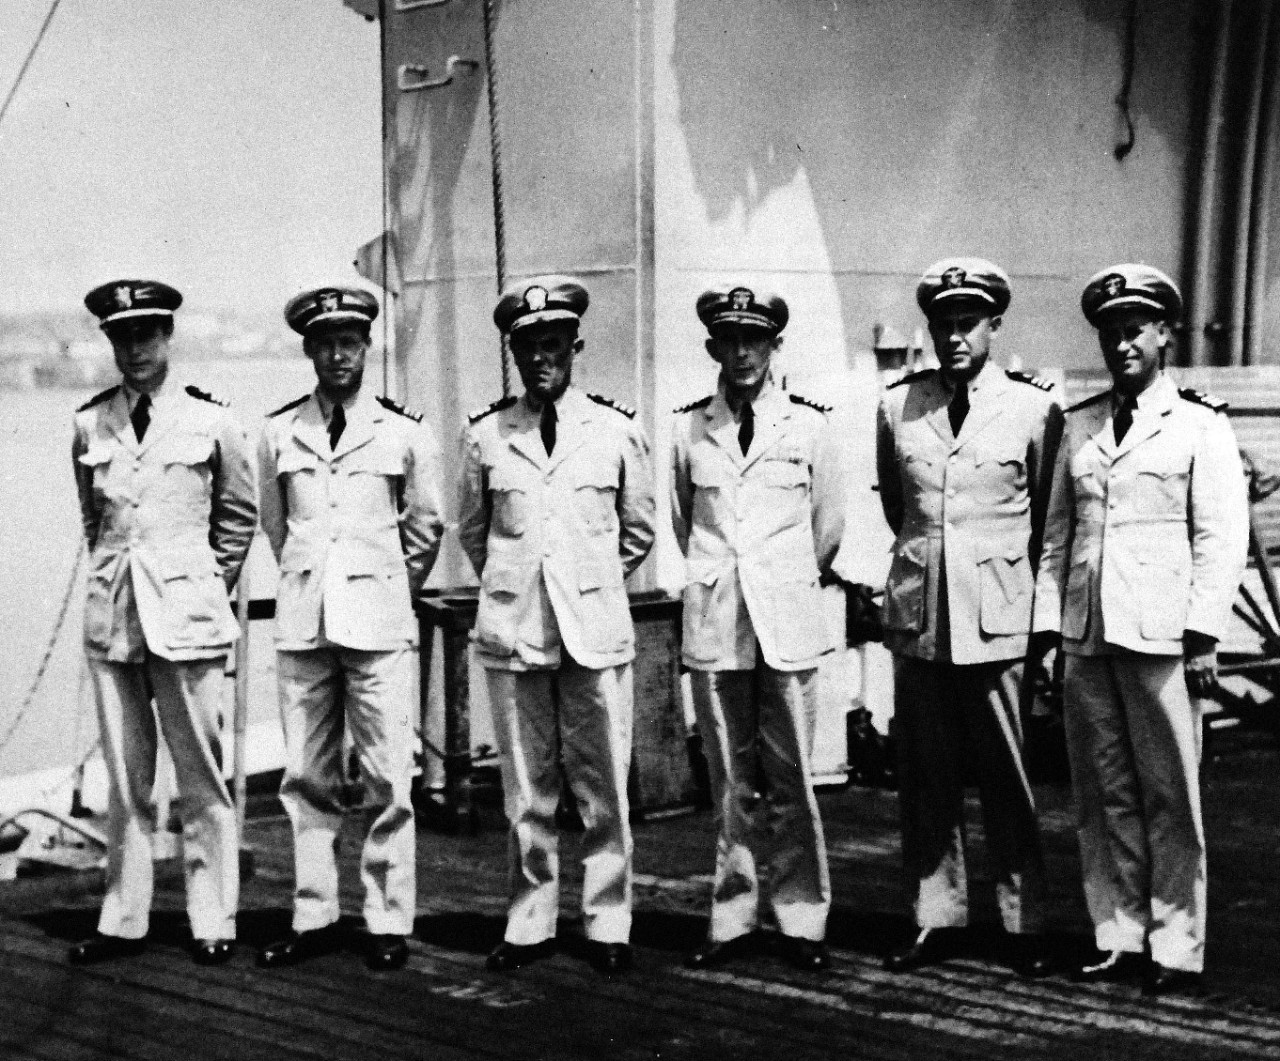 <p>80-G-49185: Capture of German Submarine U-505, June 4, 1944. Commanding Officers of various ships in Task Group that captured U-boat, U-505. Shown on flight deck of USS Guadalcanal (CVE 60). Left to right: Lieutenant Commander Means Johnston Jr., Lieutenant Commander Edwin H. Headland, Commander Frederick S. Hall, Captain Daniel V. Gallery, Commander Dudley S. Knox, and Lieutenant Commander George W. Casselman, May 16, 1945.&nbsp;</p>
